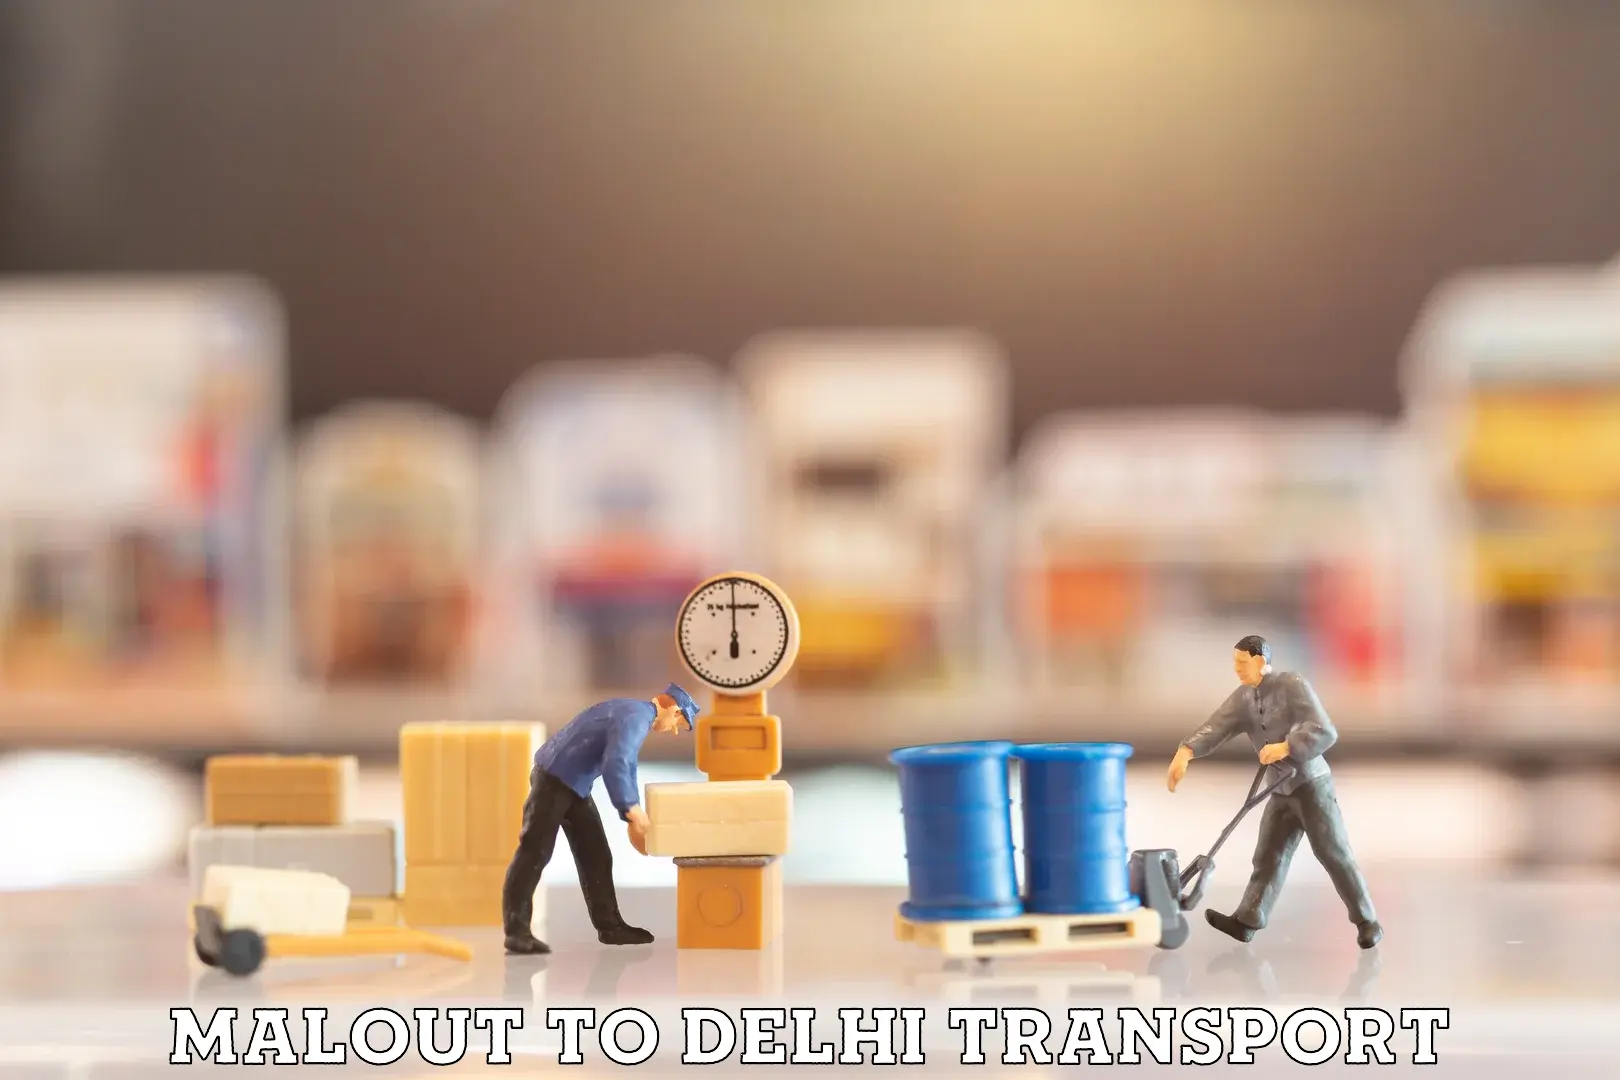 Transport in sharing Malout to NCR